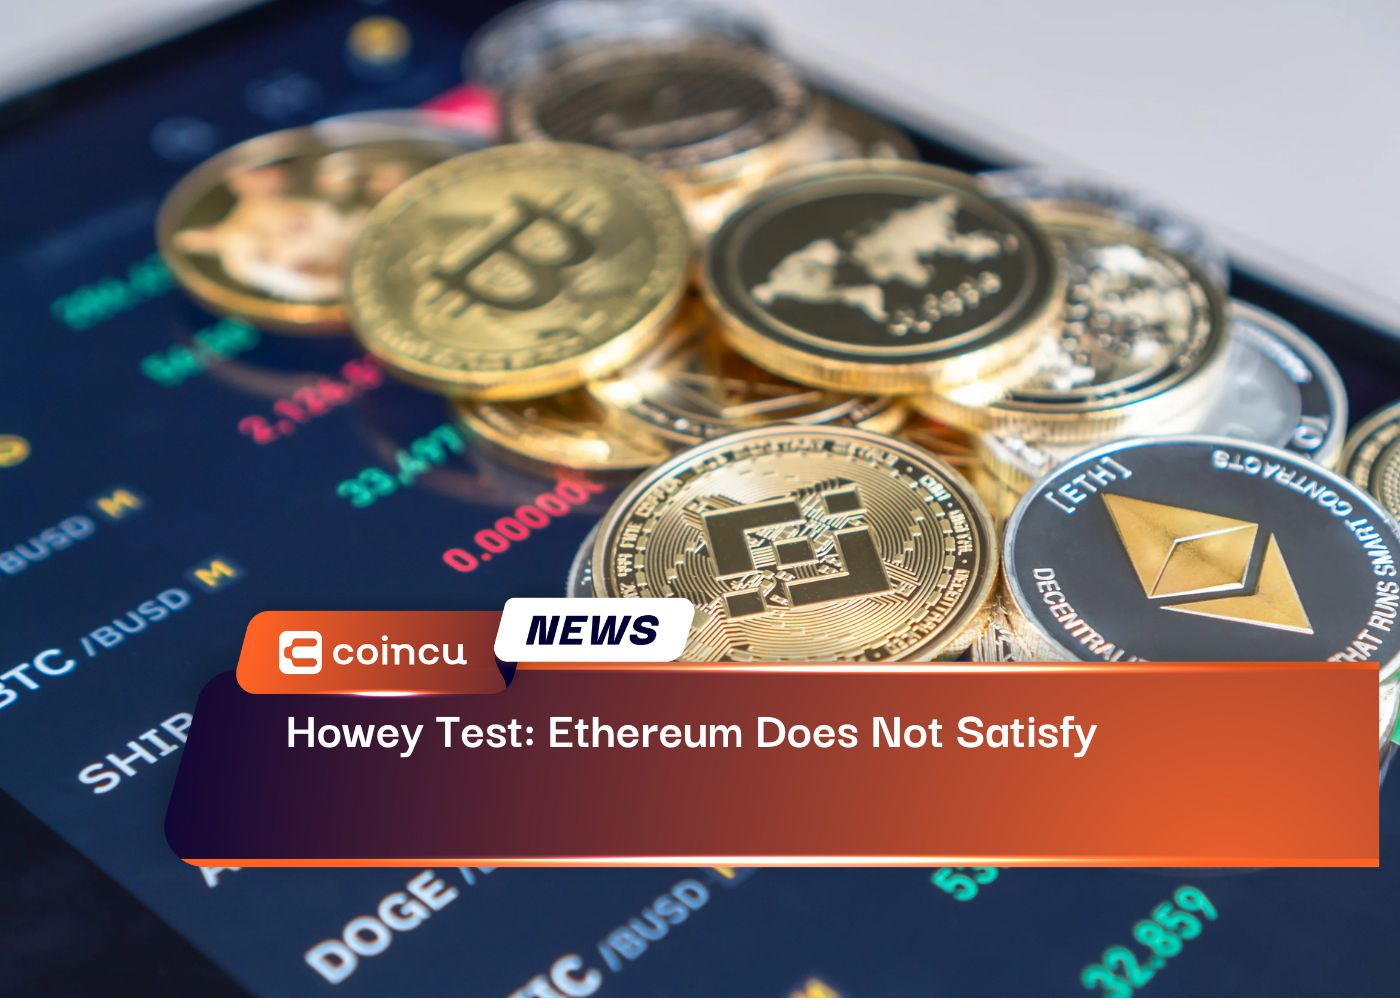 Howey Test: Ethereum Does Not Satisfy